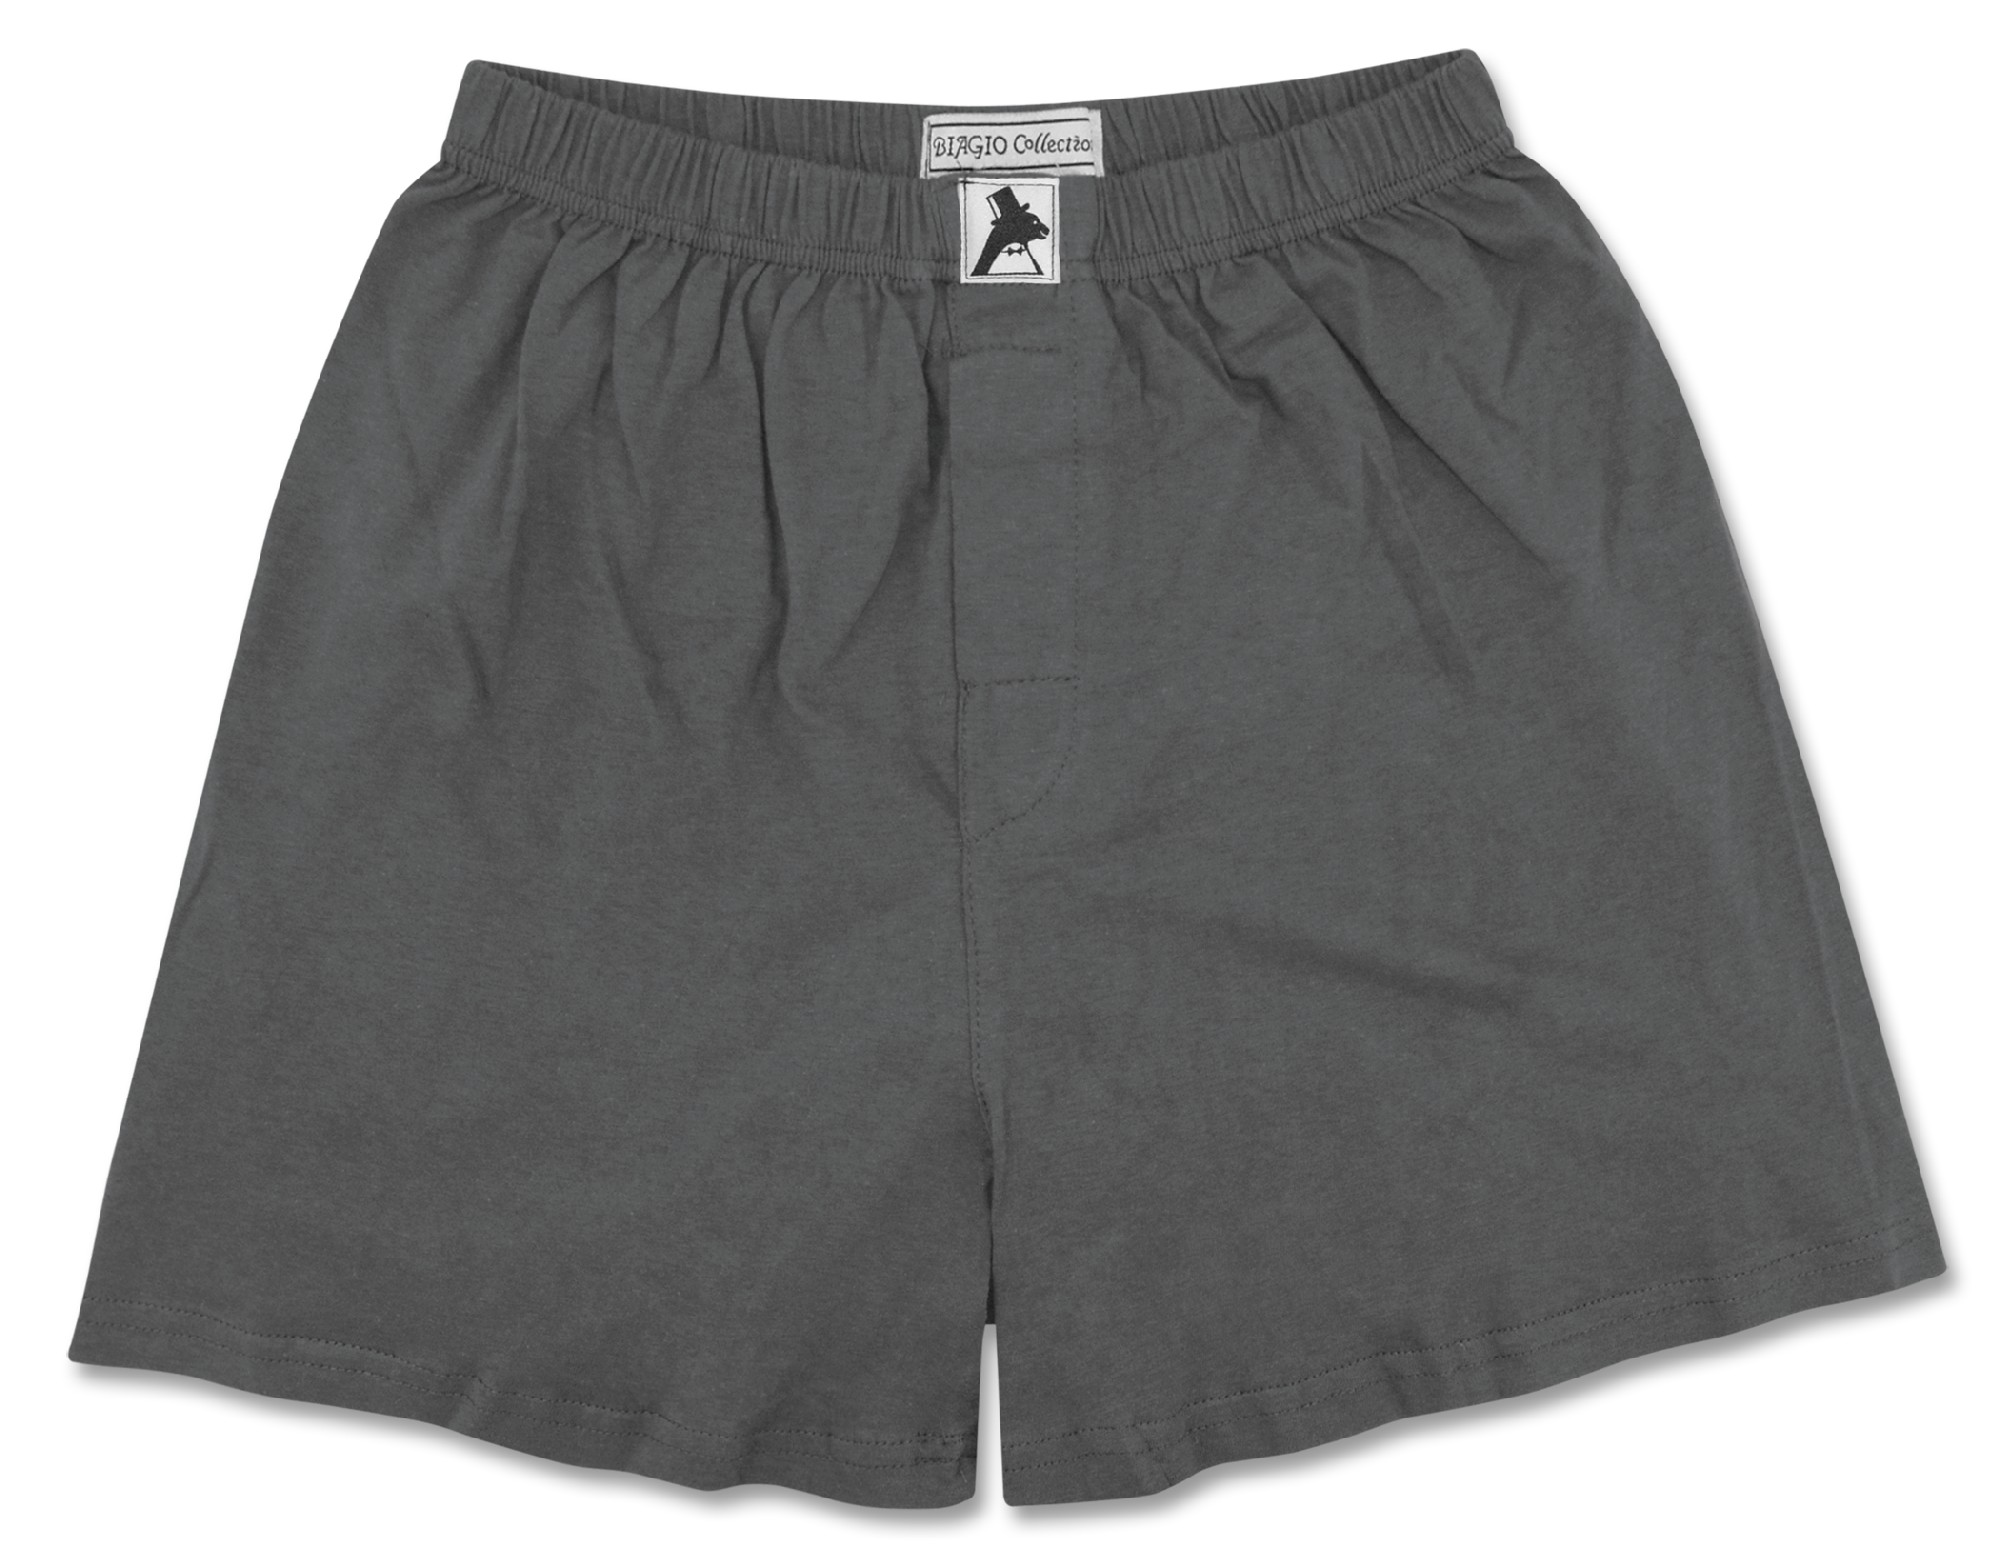 Biagio Mens Solid Charcoal Grey Color BOXER 100% Knit Cotton Shorts